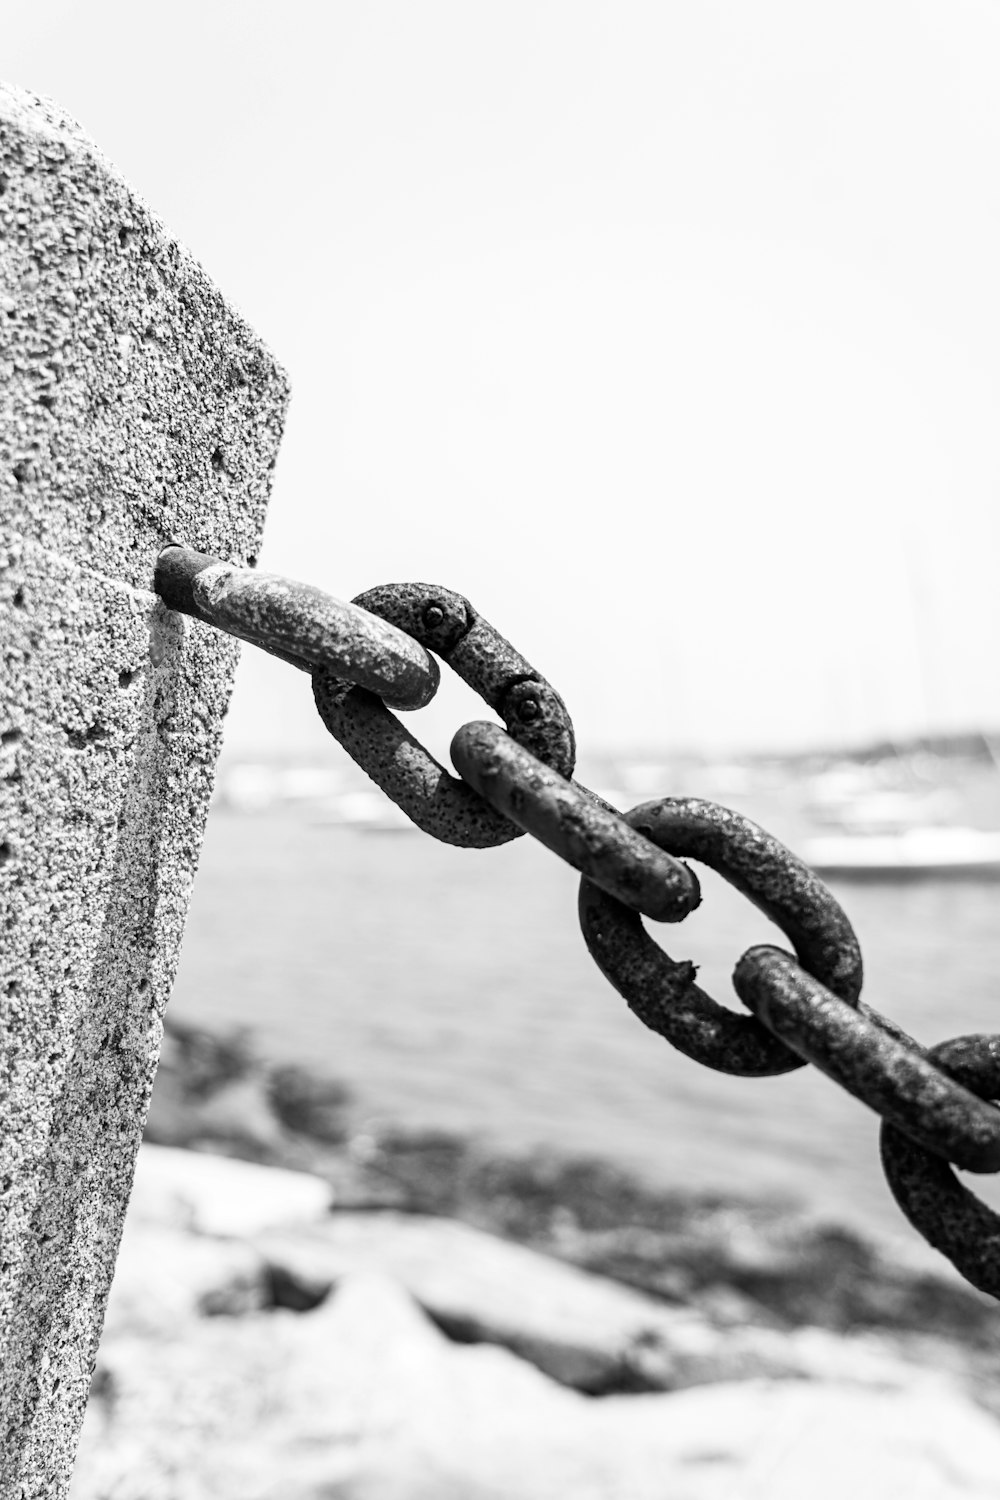 a black and white photo of a chain on a rock